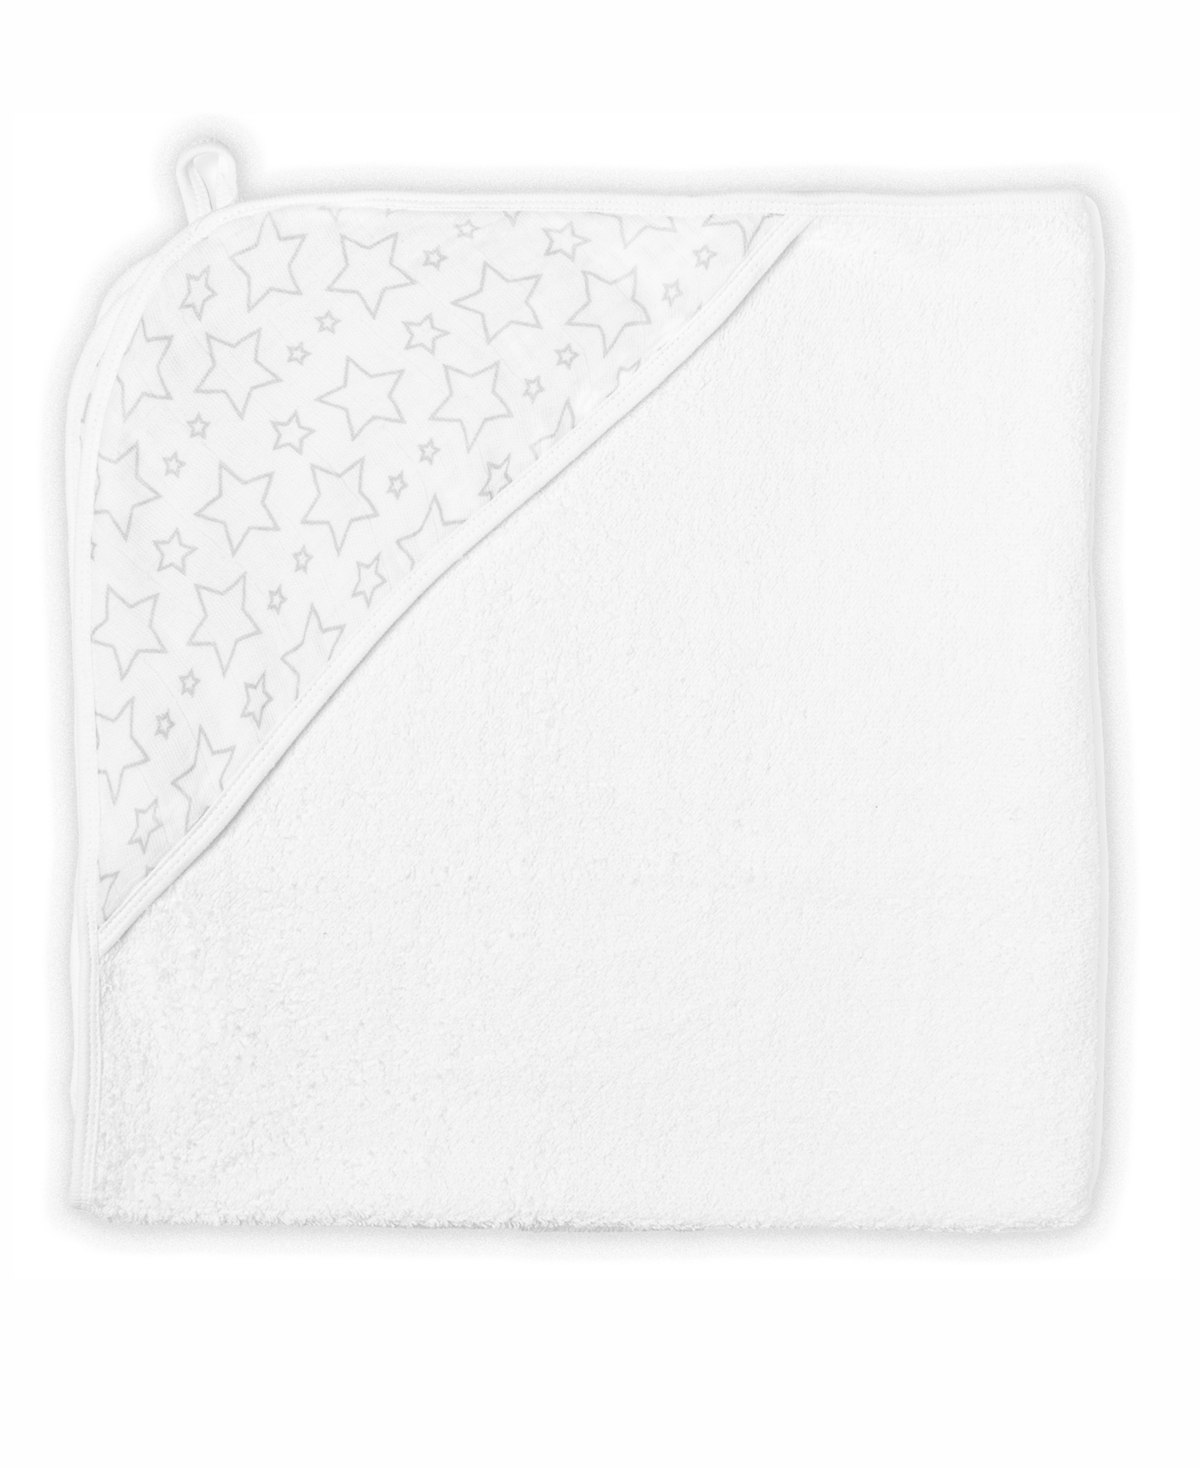 3 STORIES TRADING BABY BOYS AND BABY GIRLS STAR MUSLIN LINED HOODED TOWEL